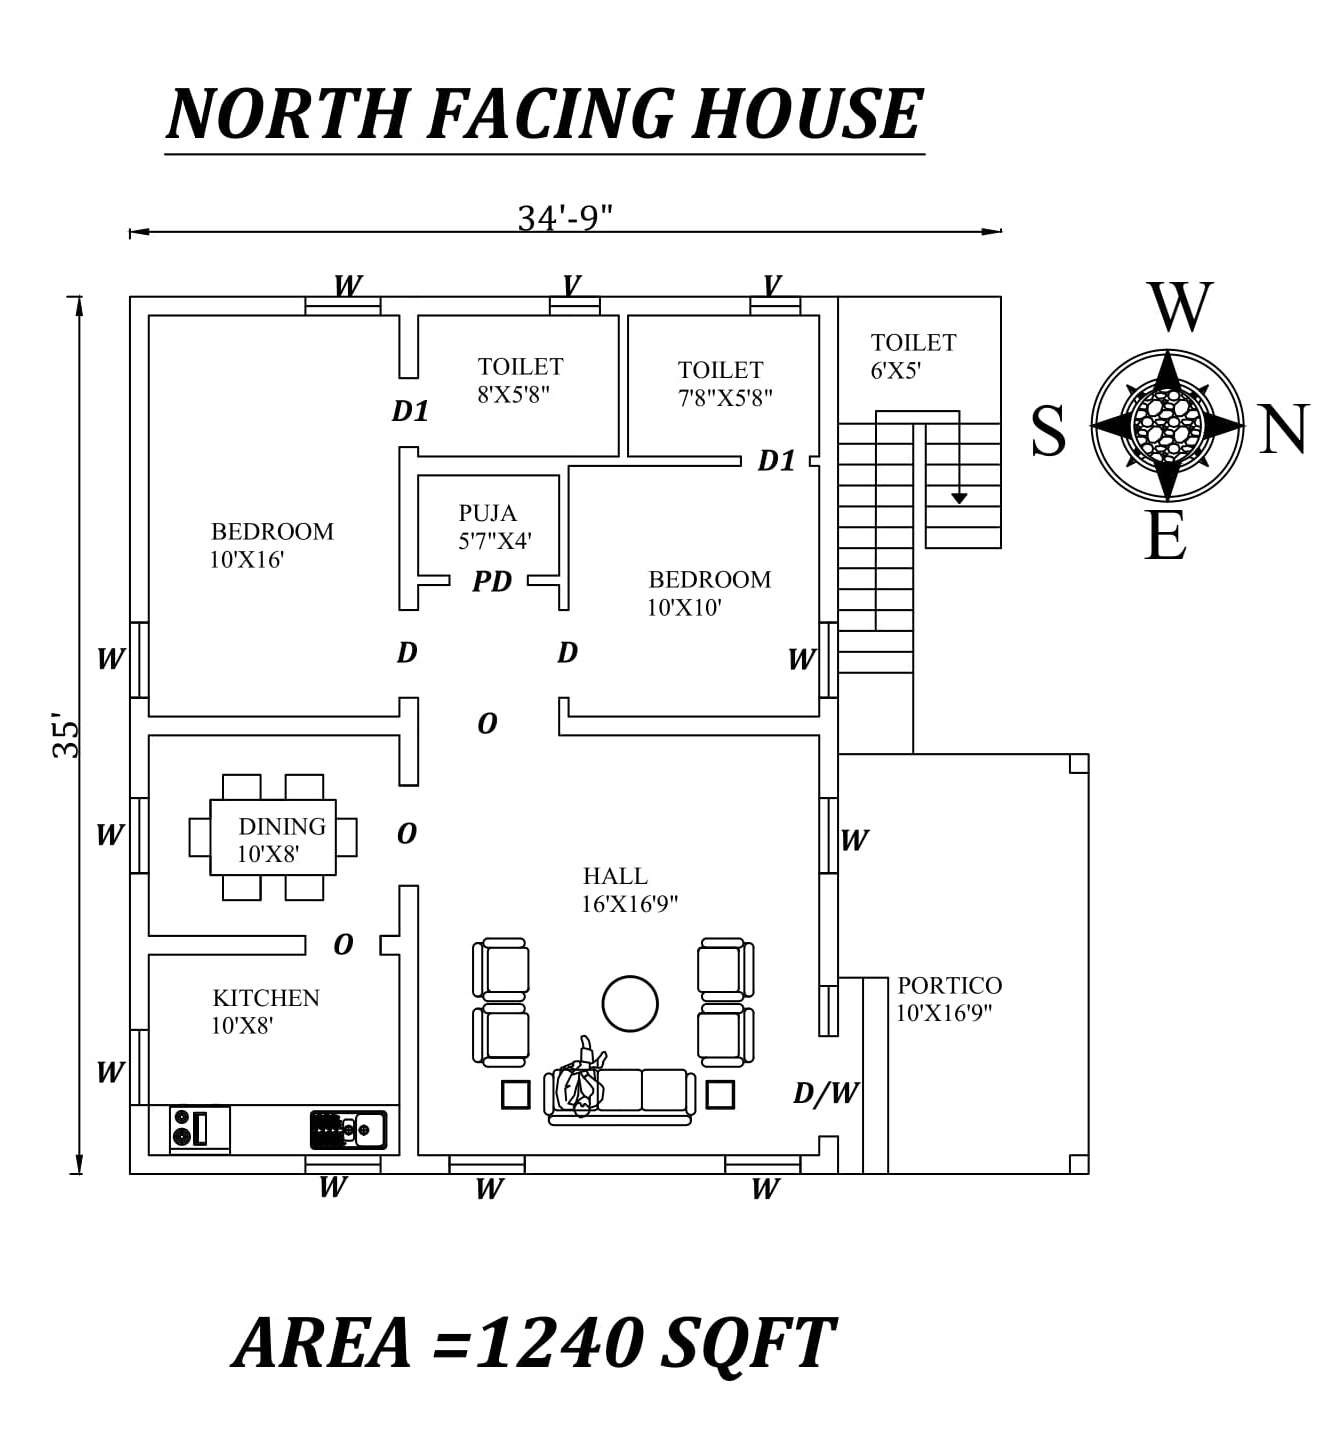 34'9"X35' Awesome Furnished North facing 2bhk house plan